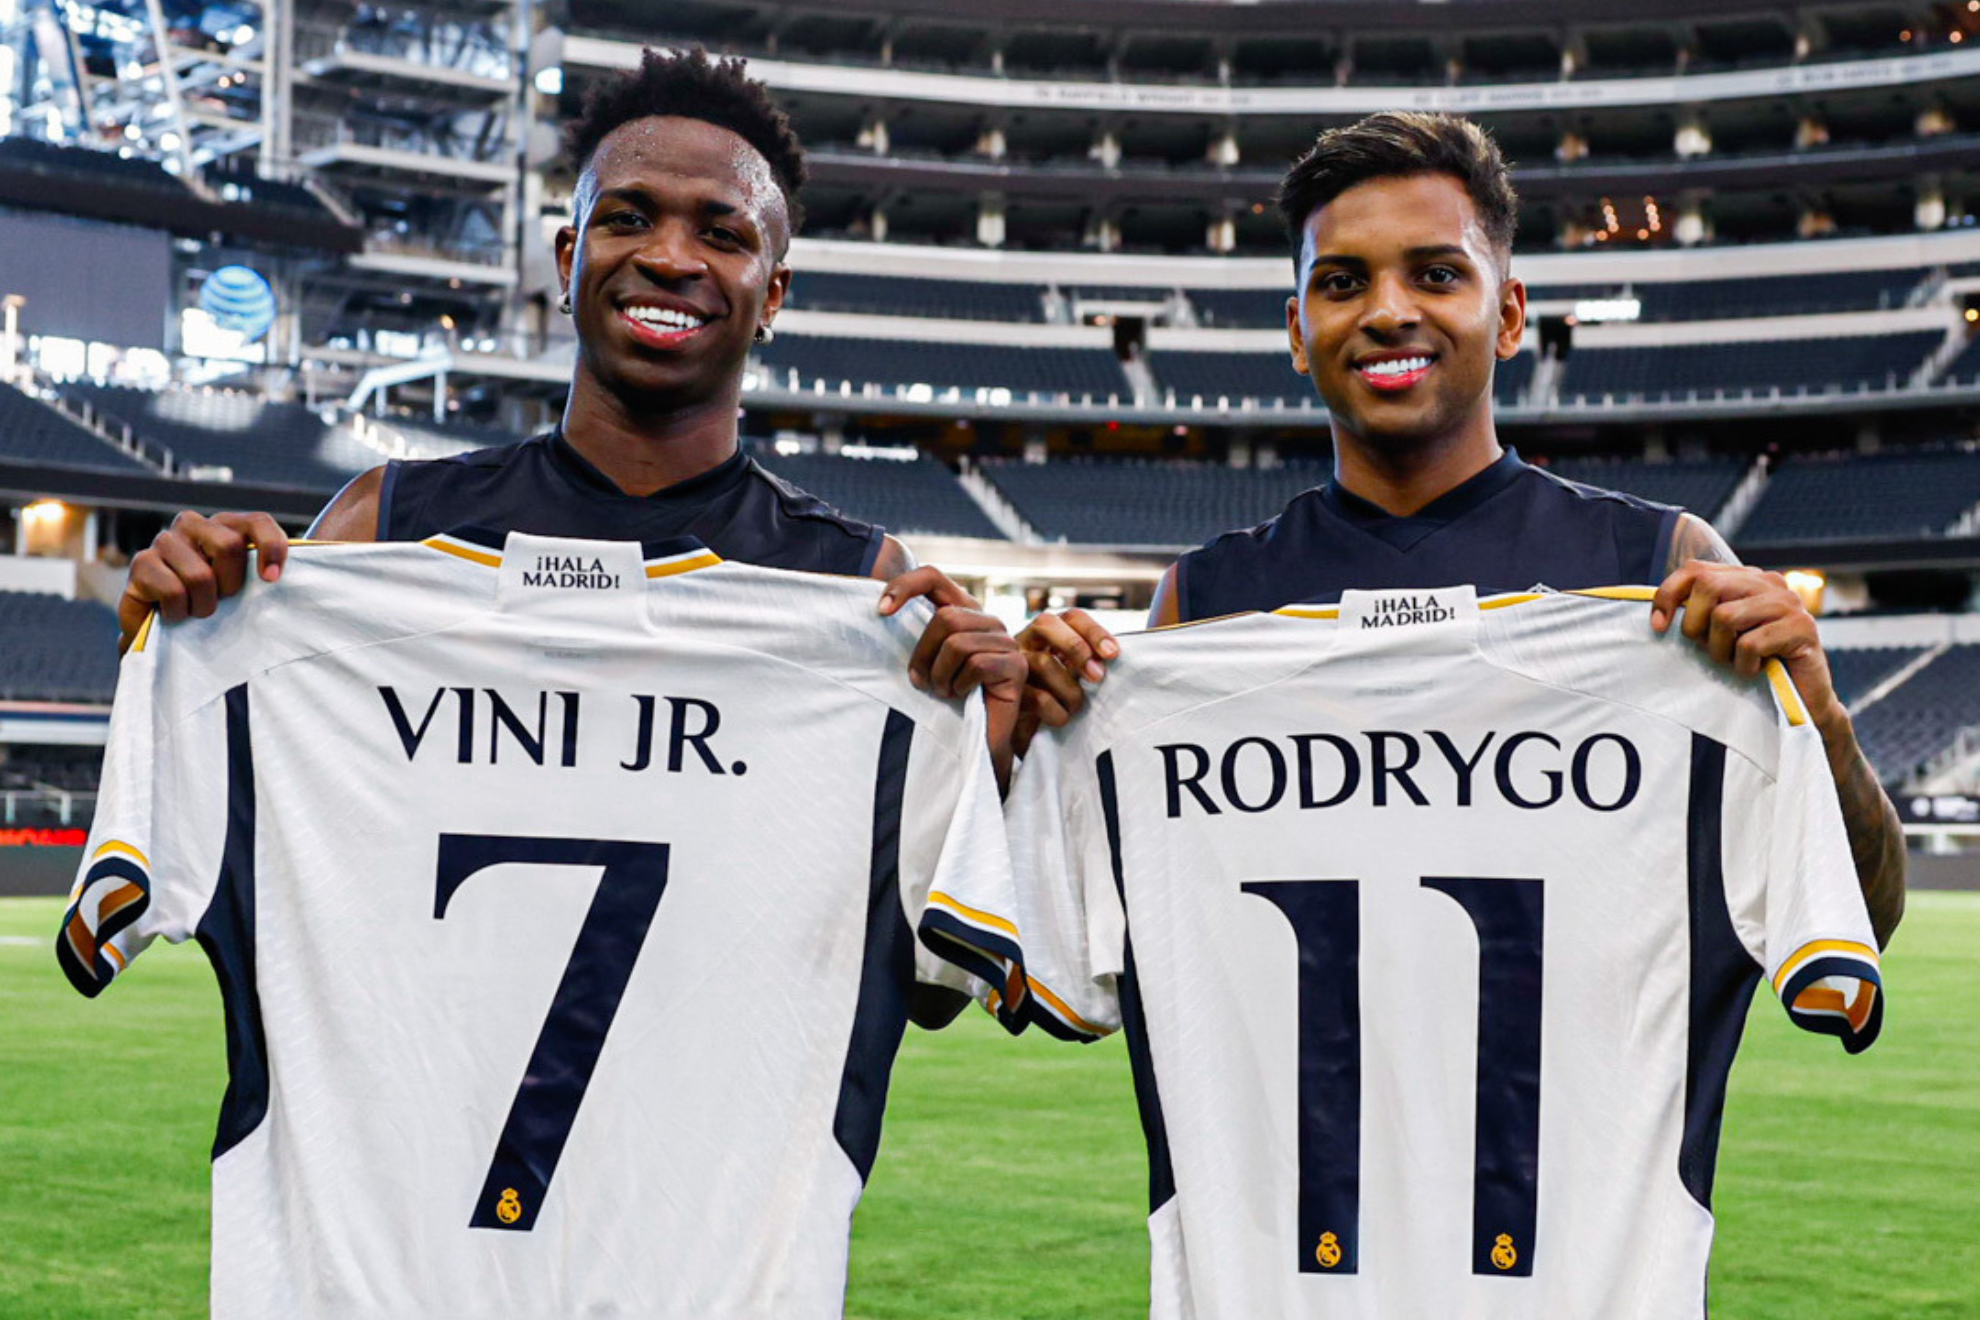 Vinicius Jr. and Rodrygo pose with their new jersey numbers.